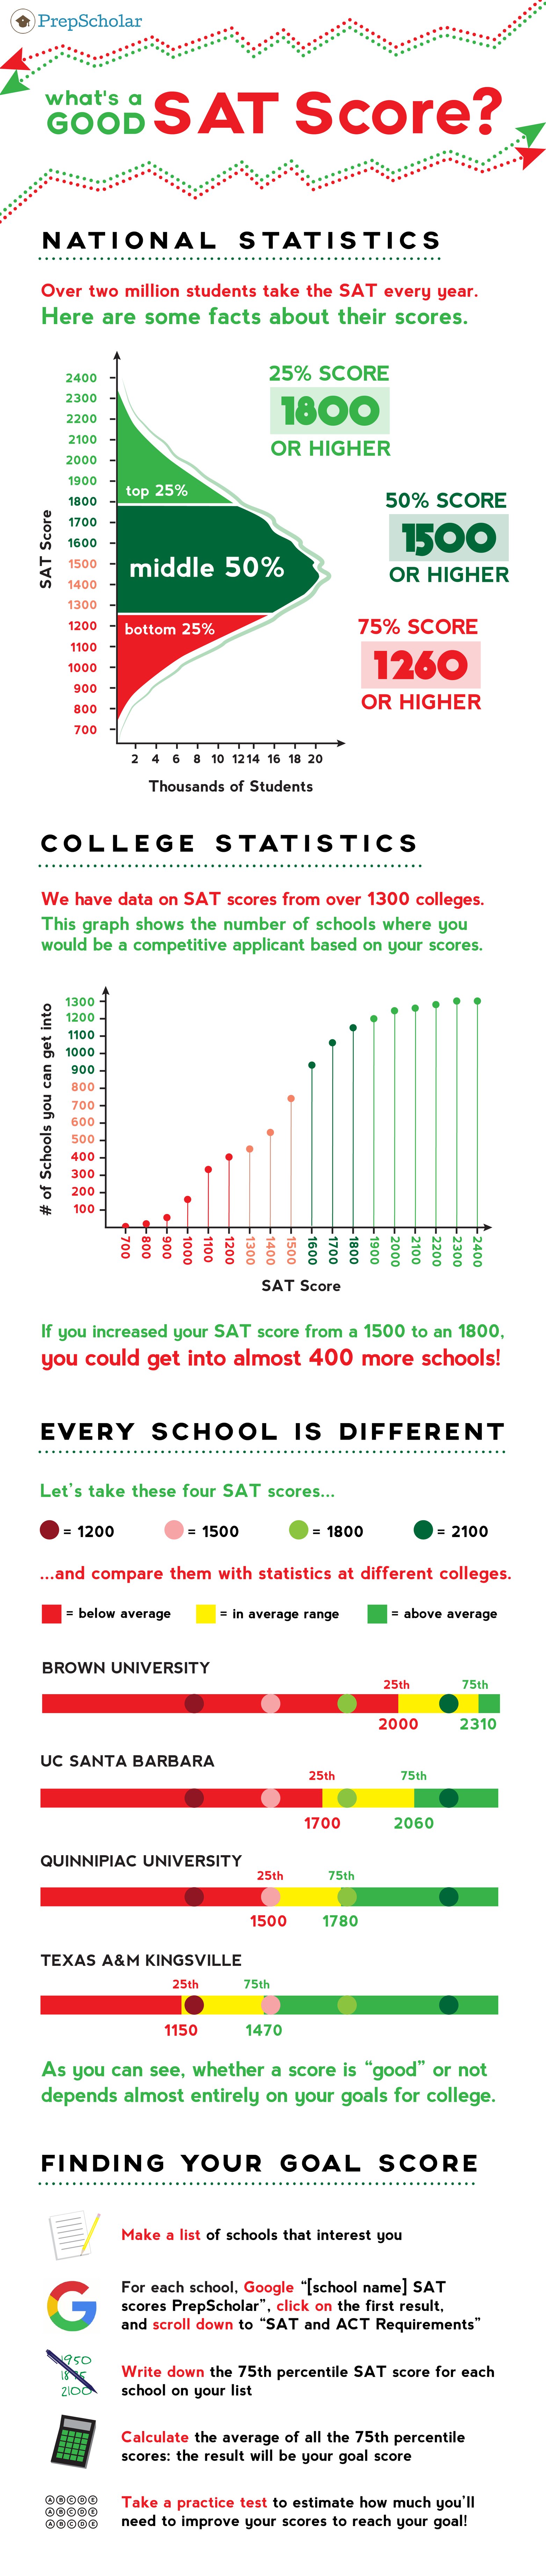 infographic-what-s-a-good-sat-score-for-college